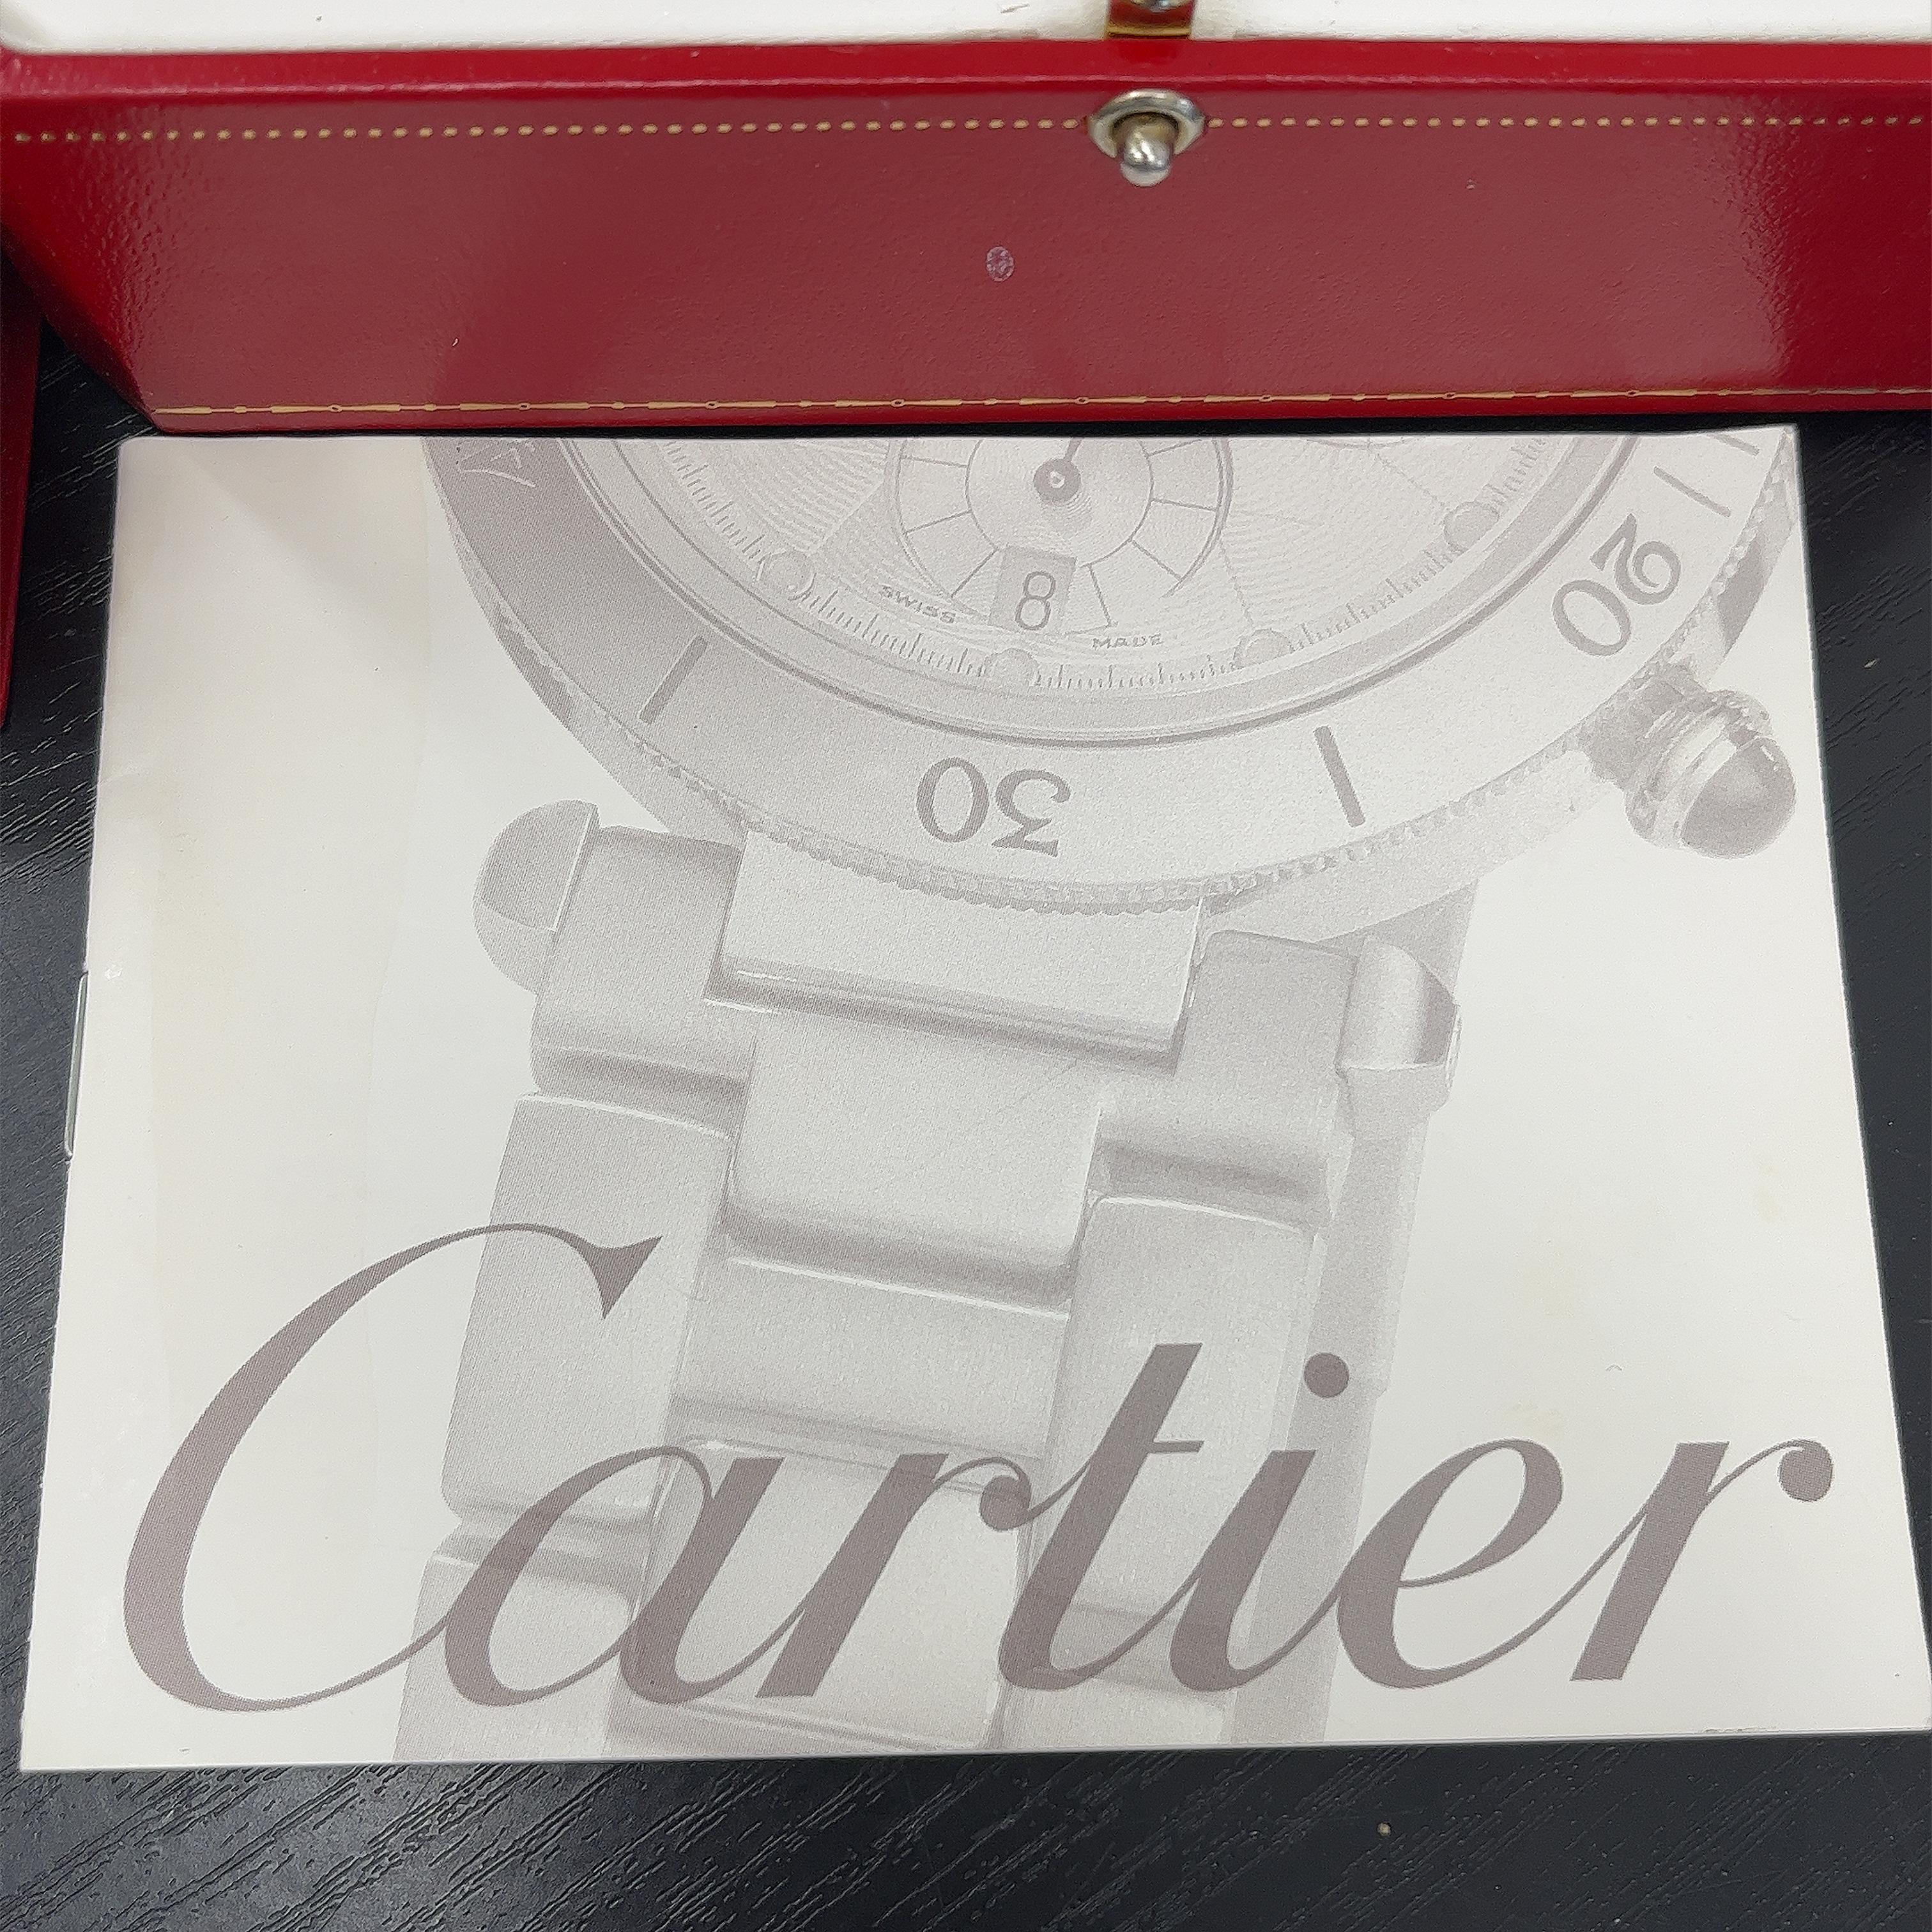 Cartier Baignoire Small 18ct White Gold Diamond Set Ladies Strap Watch
31.4mm x 23.1mm case and two-row diamond, 
set bezel all on a black leather strap. 
With original box and papers
New strap 
Total Weight: 36.87g
Case Measurement: 31.4mm x